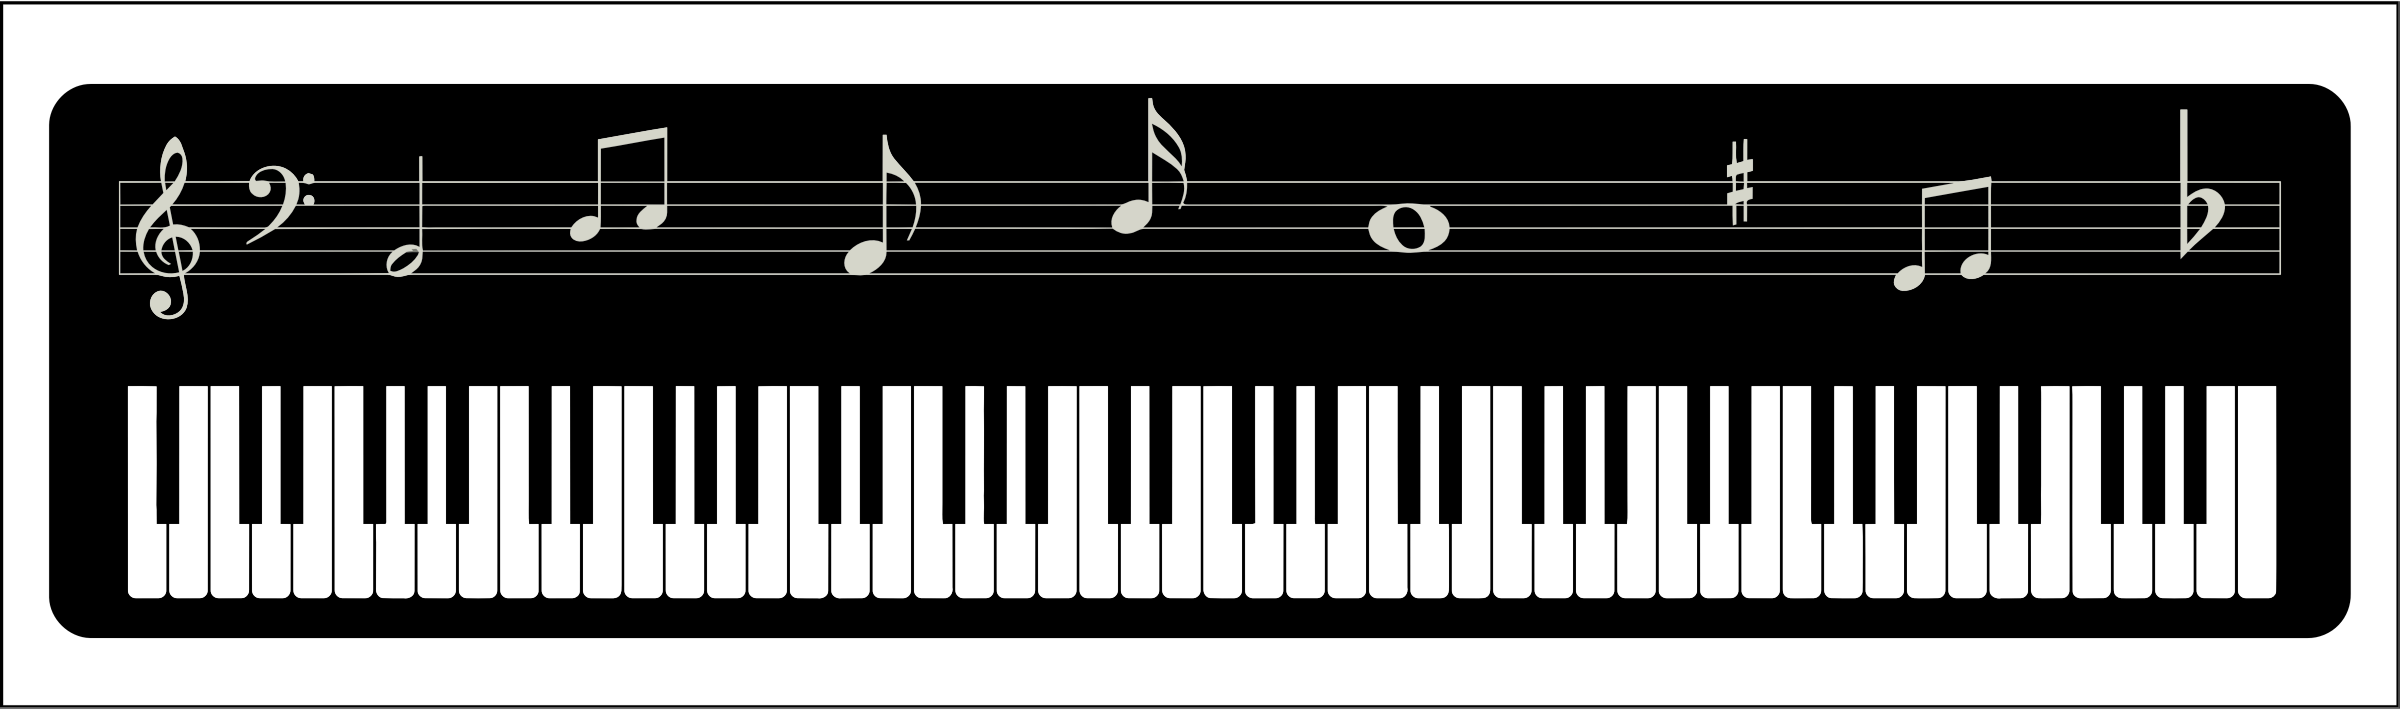 music keys and notes